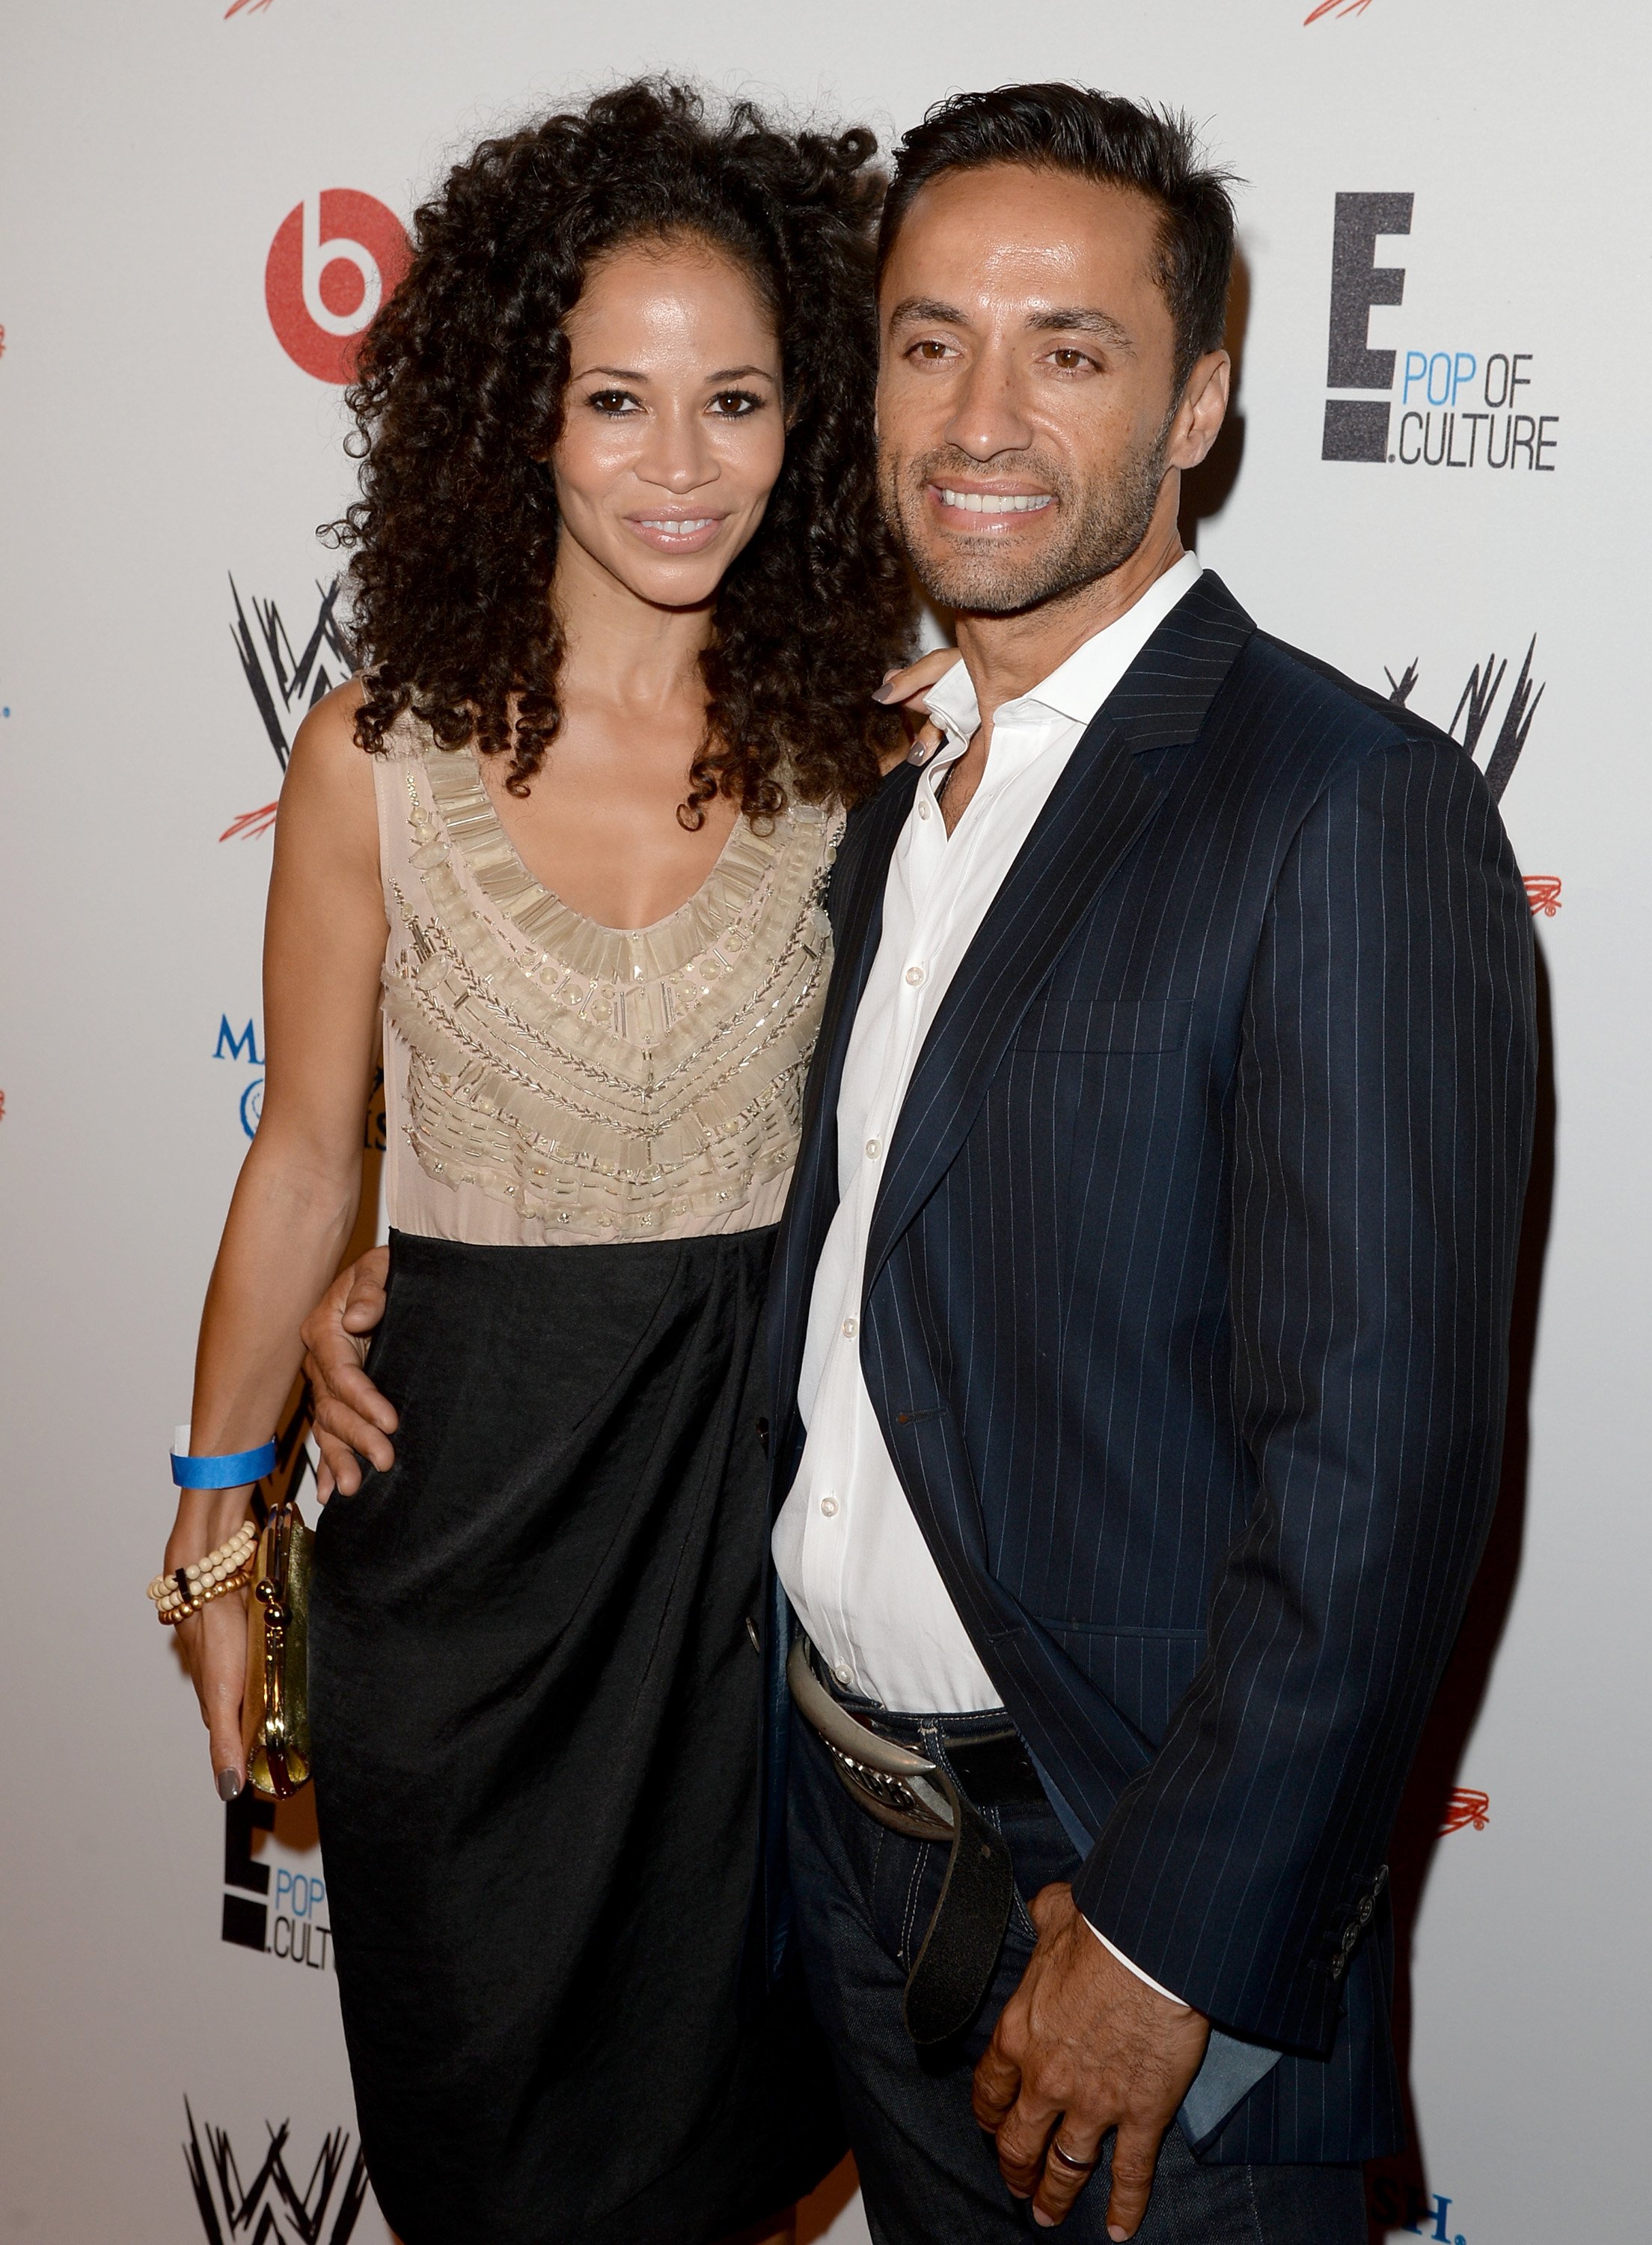 Sherri Saum (L) and Kamar de los Reyes attends WWE & E! Entertainment's "SuperStars For Hope" at the Beverly Hills Hotel on August 15, 2013, in Beverly Hills, California. | Source: Getty Images.